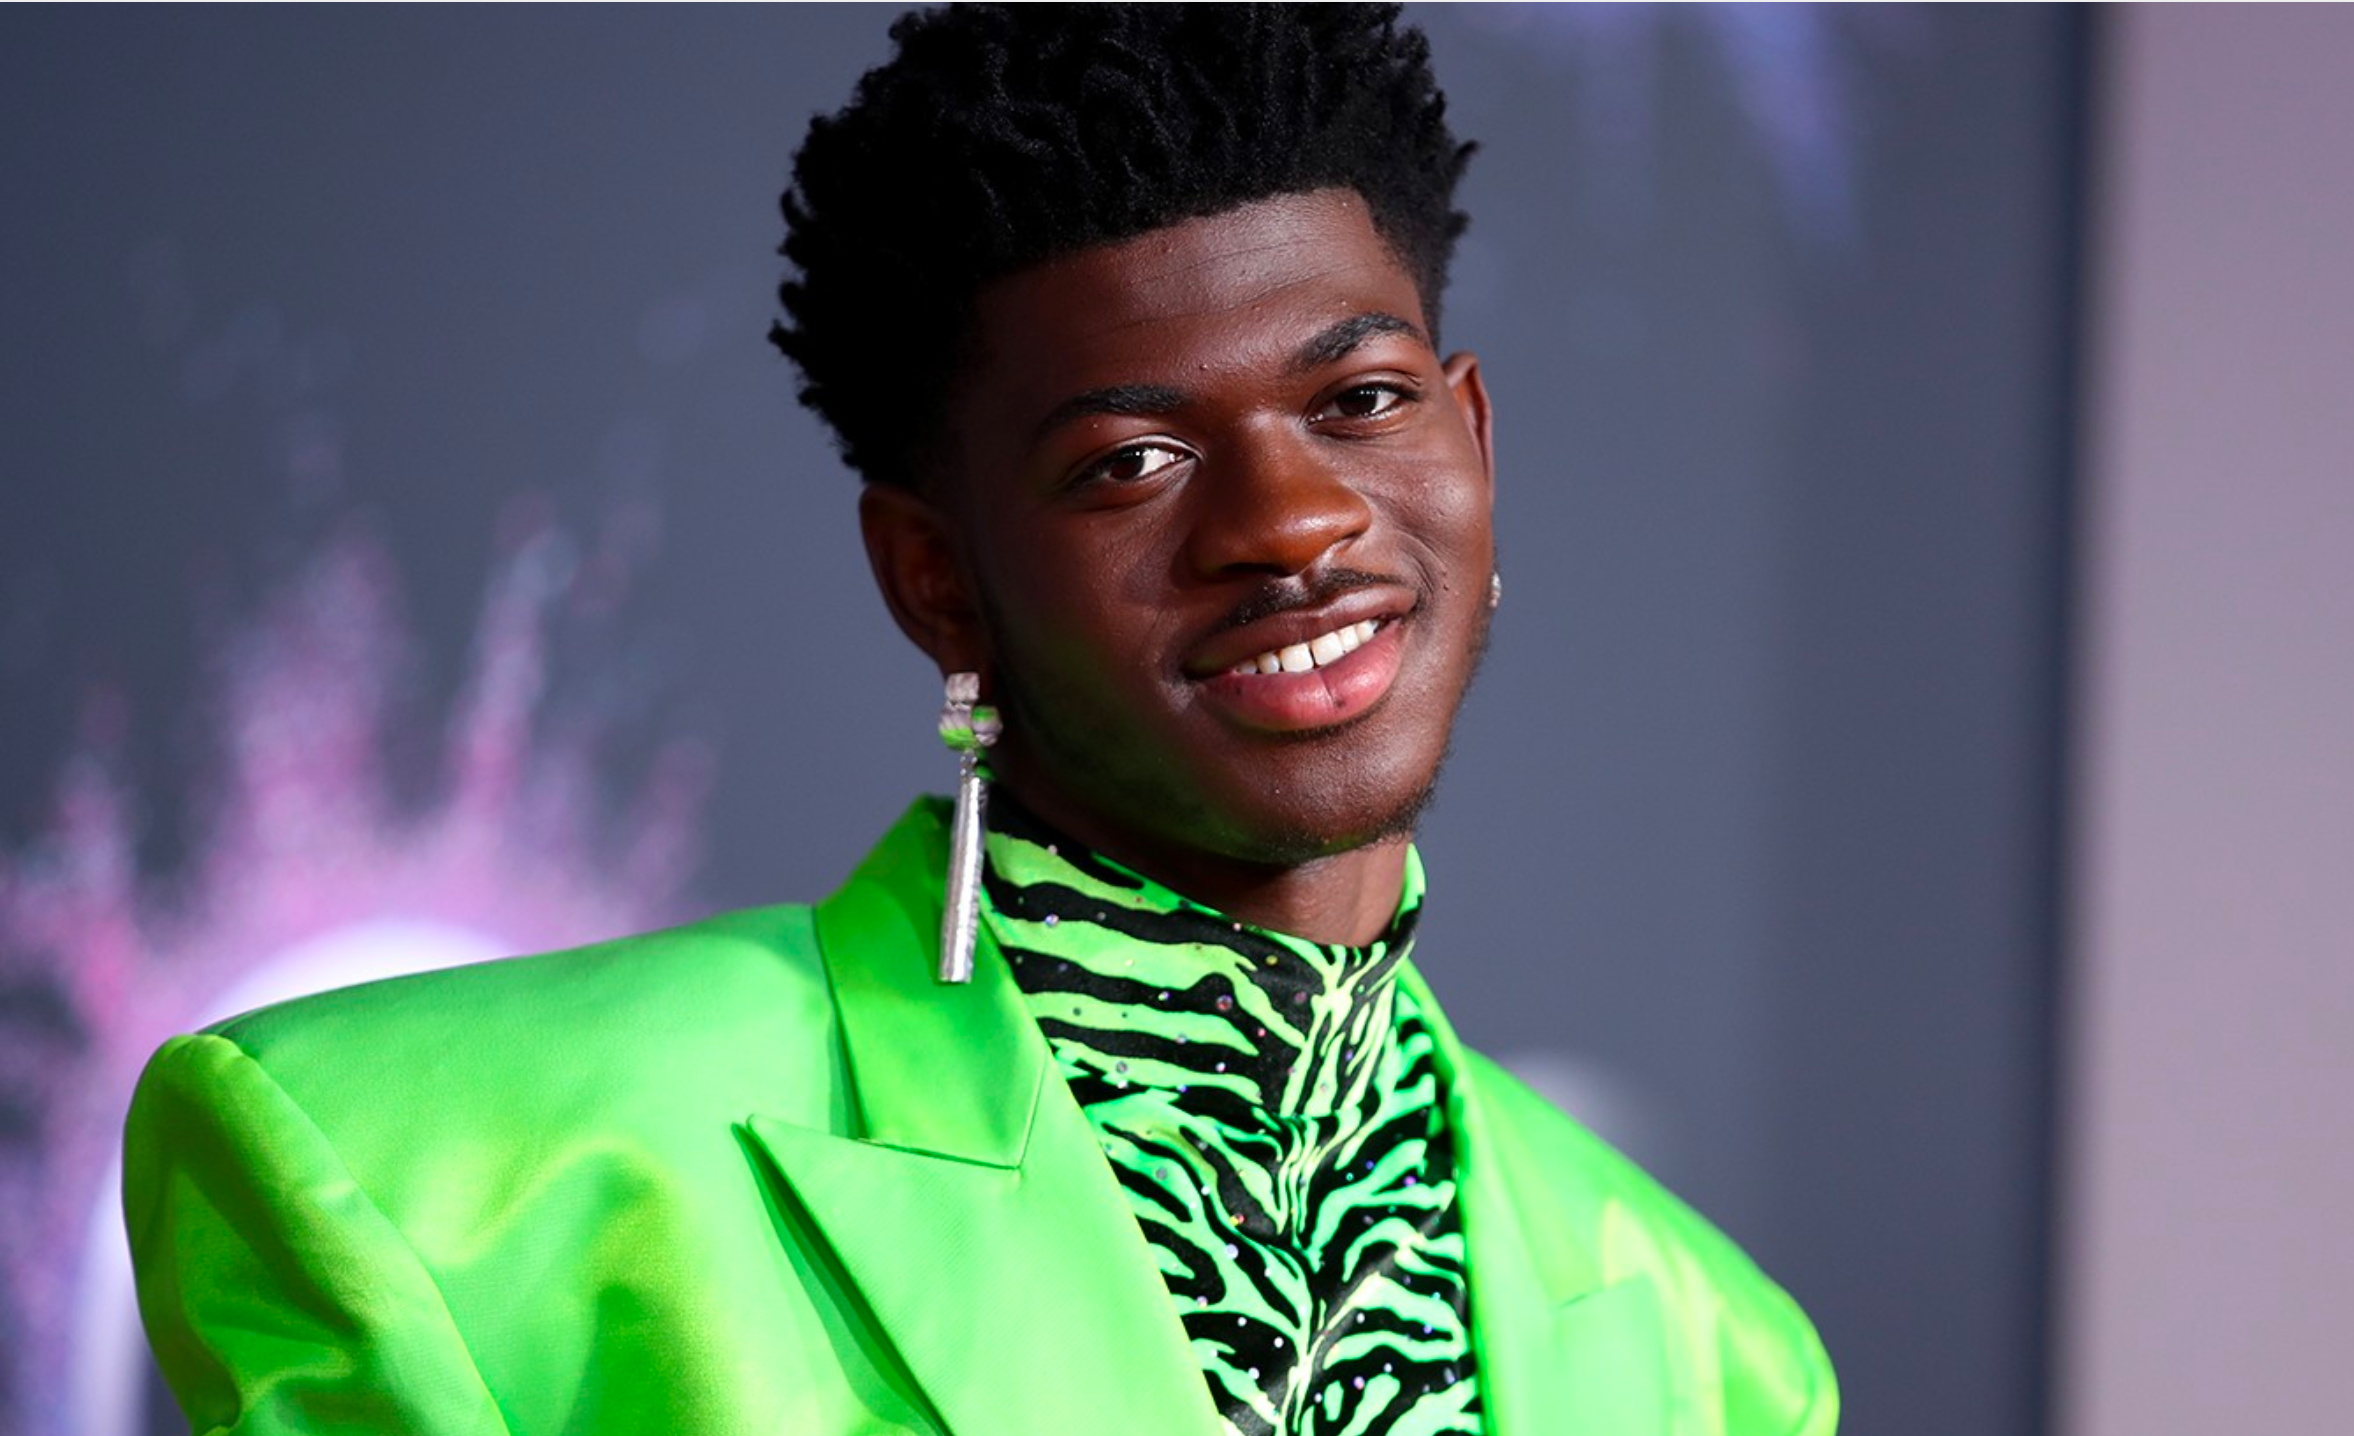 Lil Nas X's "MONTERO (Call Me By Your Name)" Debuts at No. 1 on Billboard Hot 100